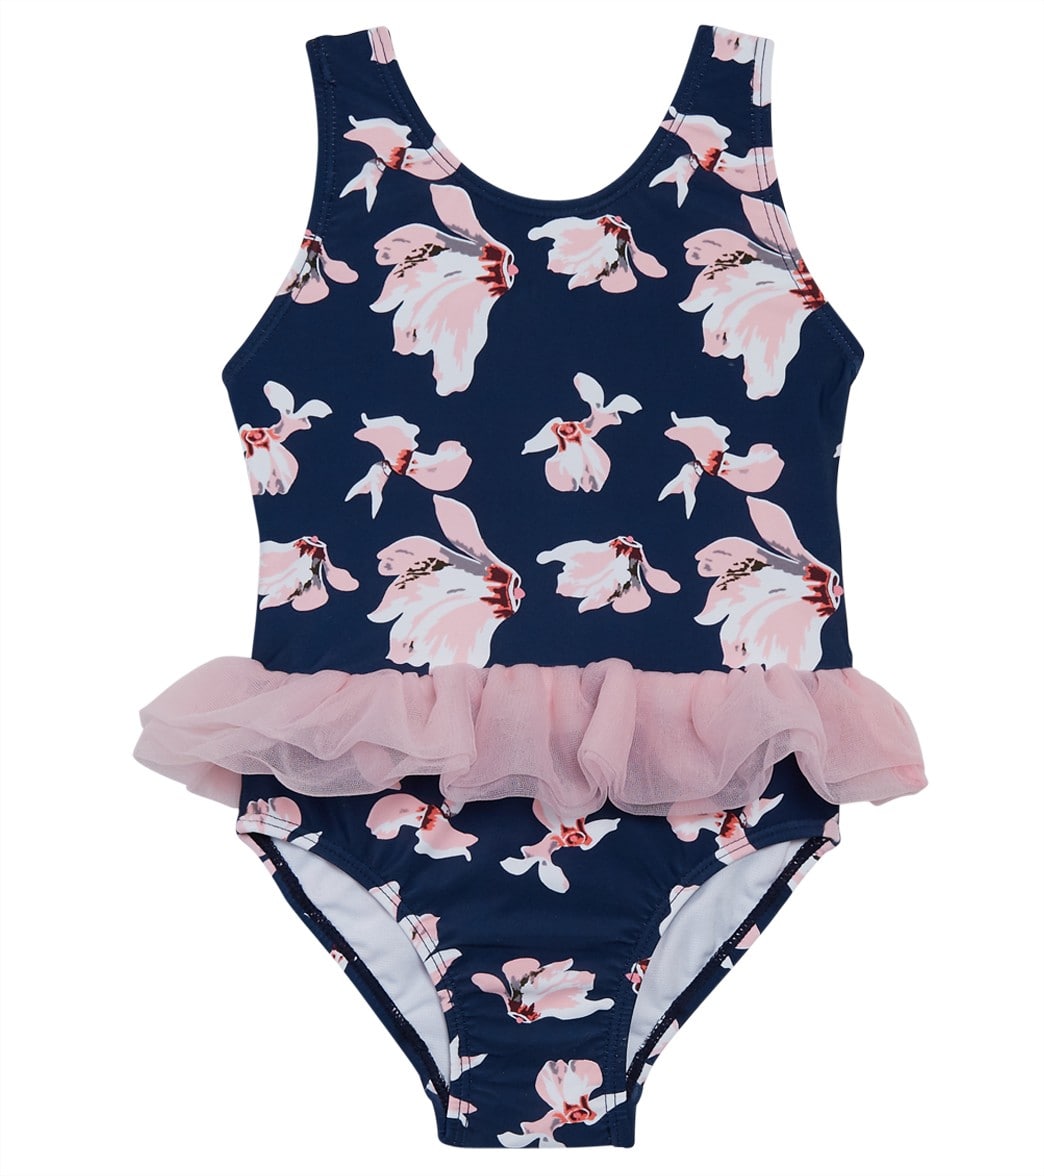 Snapper Rock Girls' Navy Orchid Tulle Skirt One Piece Swimsuit Baby - 18-24 Months Nylon/Spandex - Swimoutlet.com